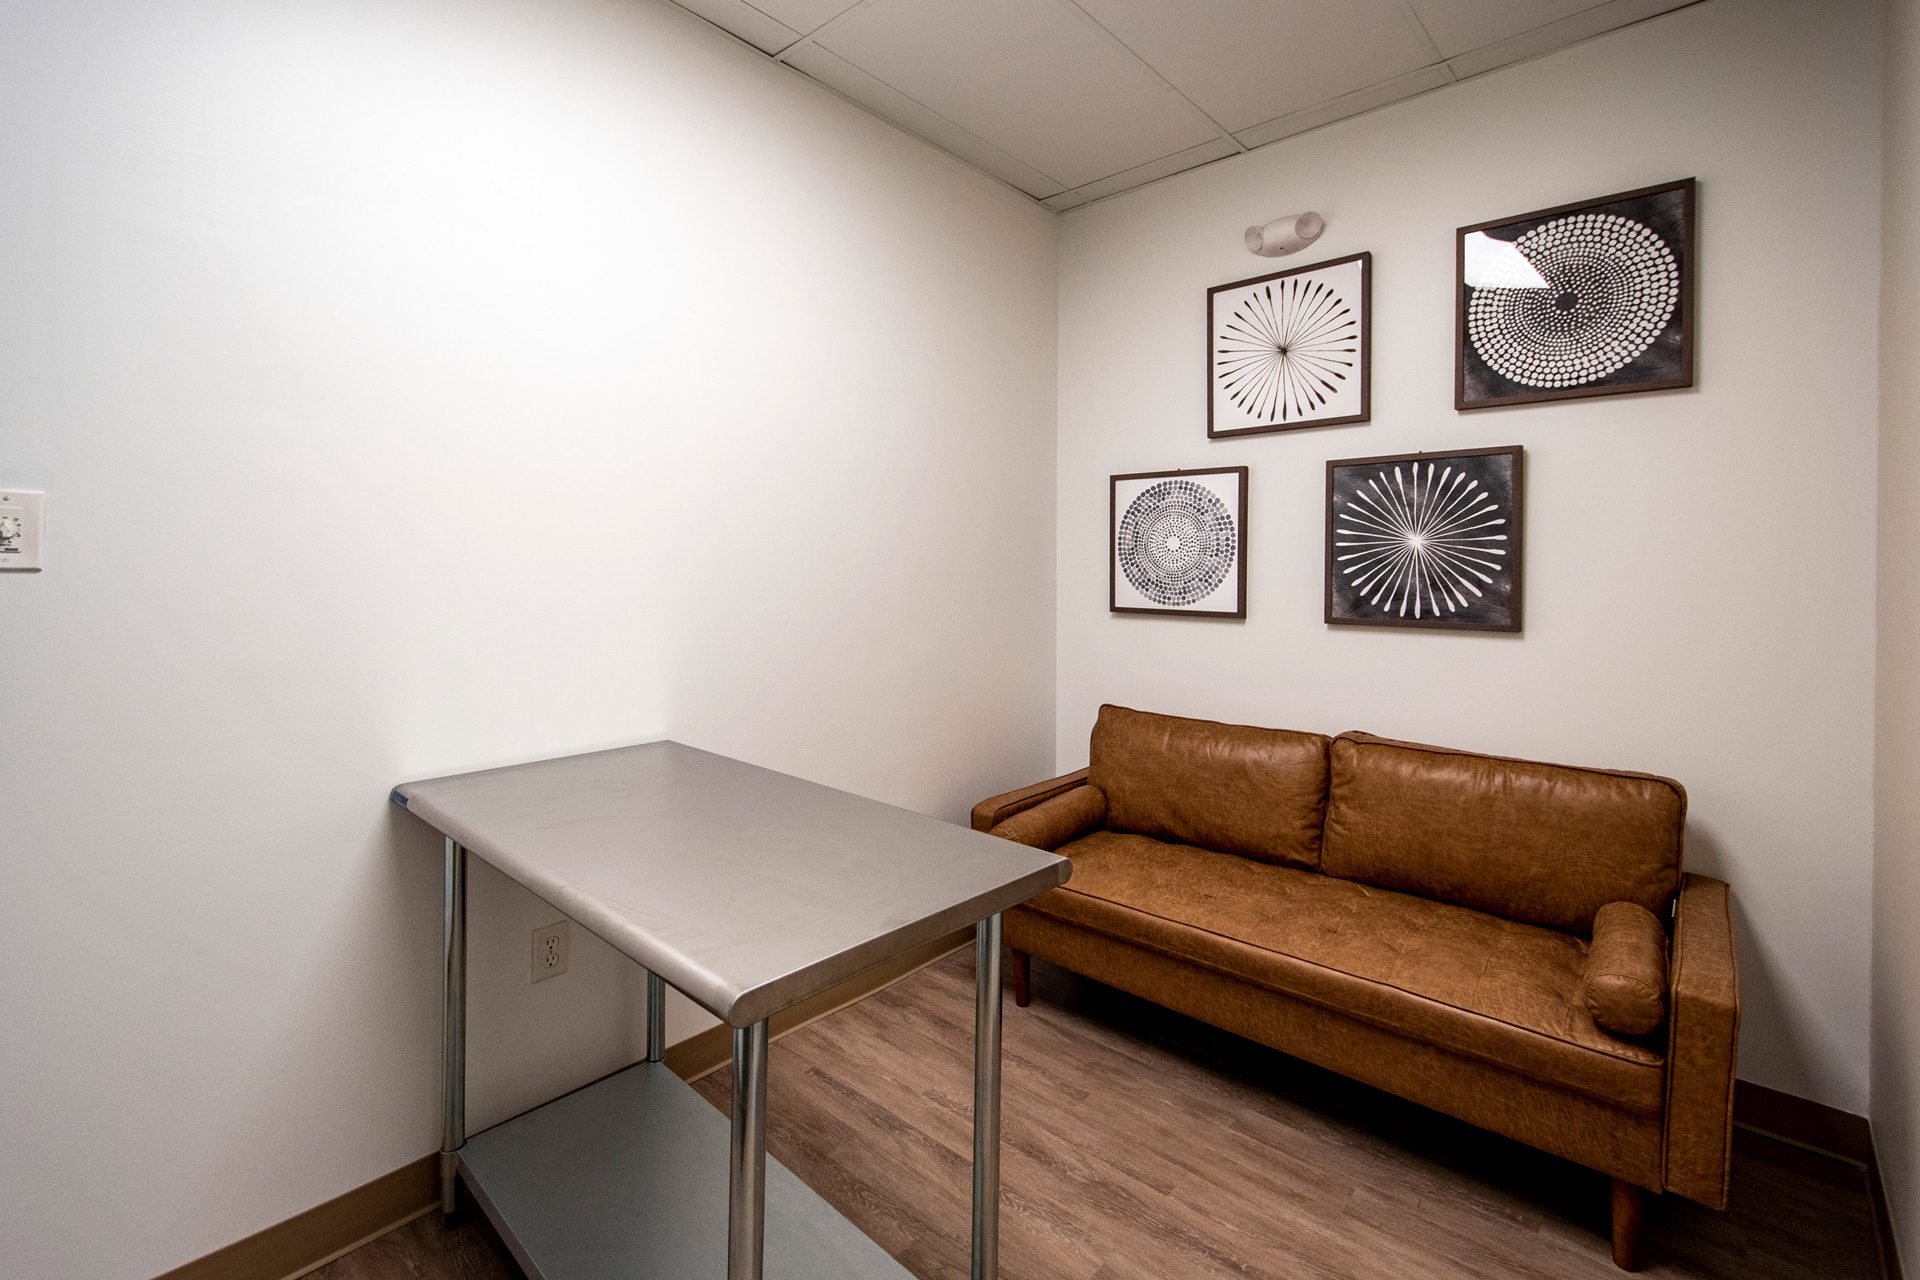 Whole Pet Veterinary Hospital consultation room with steel table and leather couch